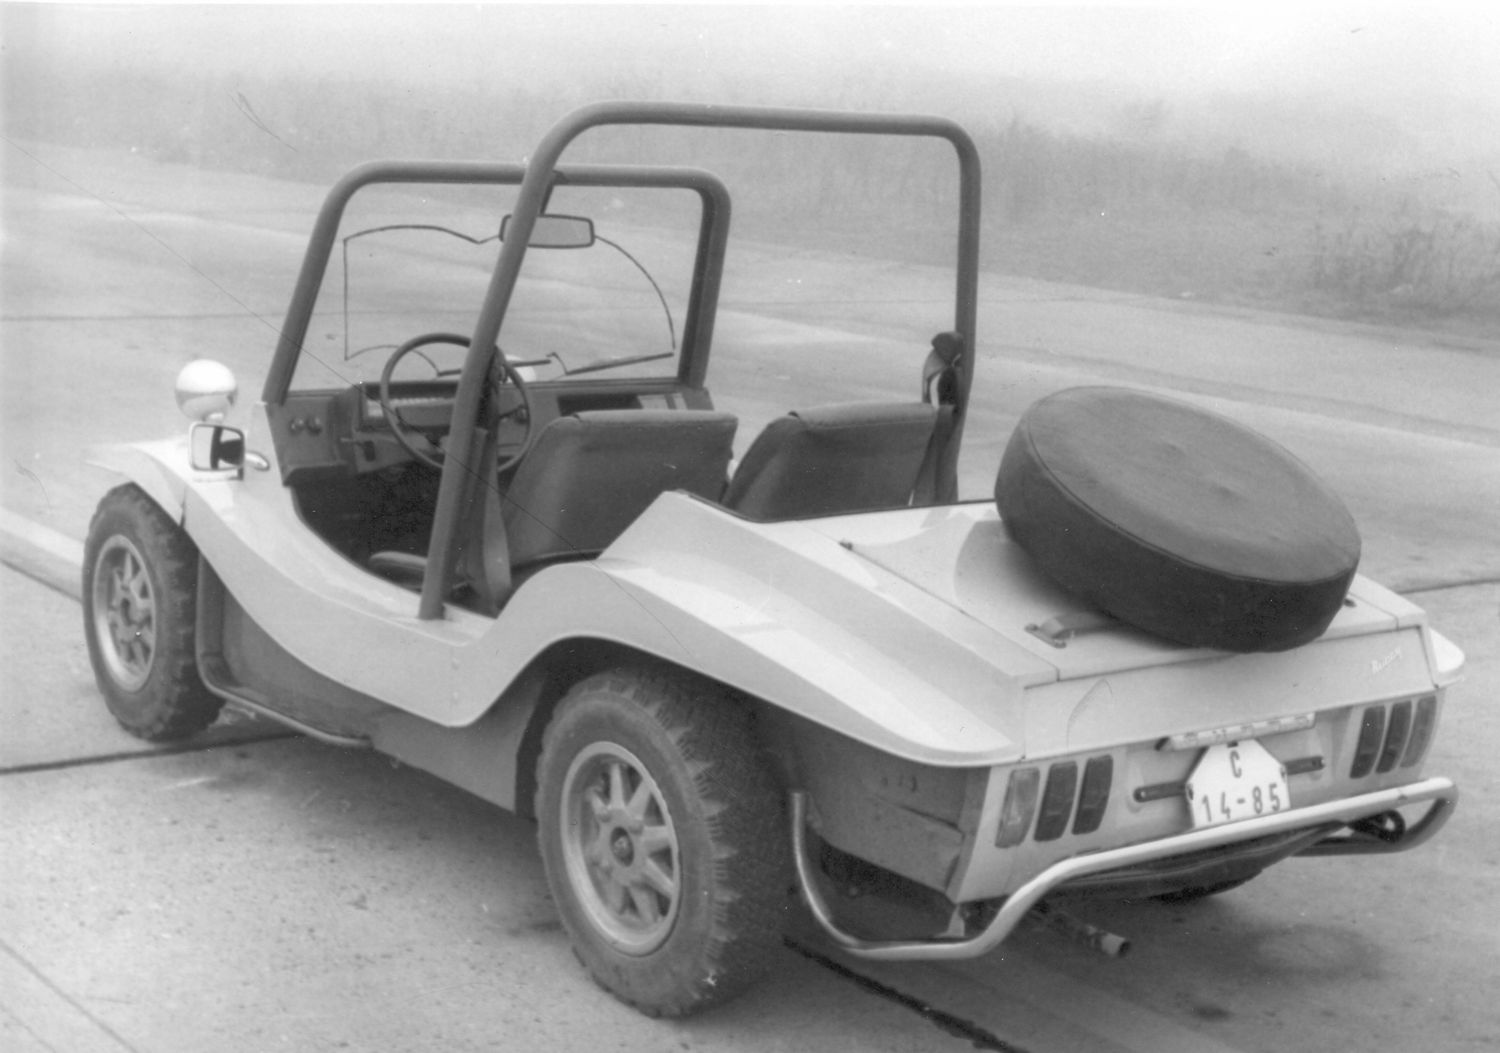 The minimalist BUGGY interior made maintenance and
cleaning it easier. One had to step over the raised and
stiffened side skirts to enter the doorless vehicle. A
raised textile roof and side panels with transparent
windows protected the occupants from the elements.
